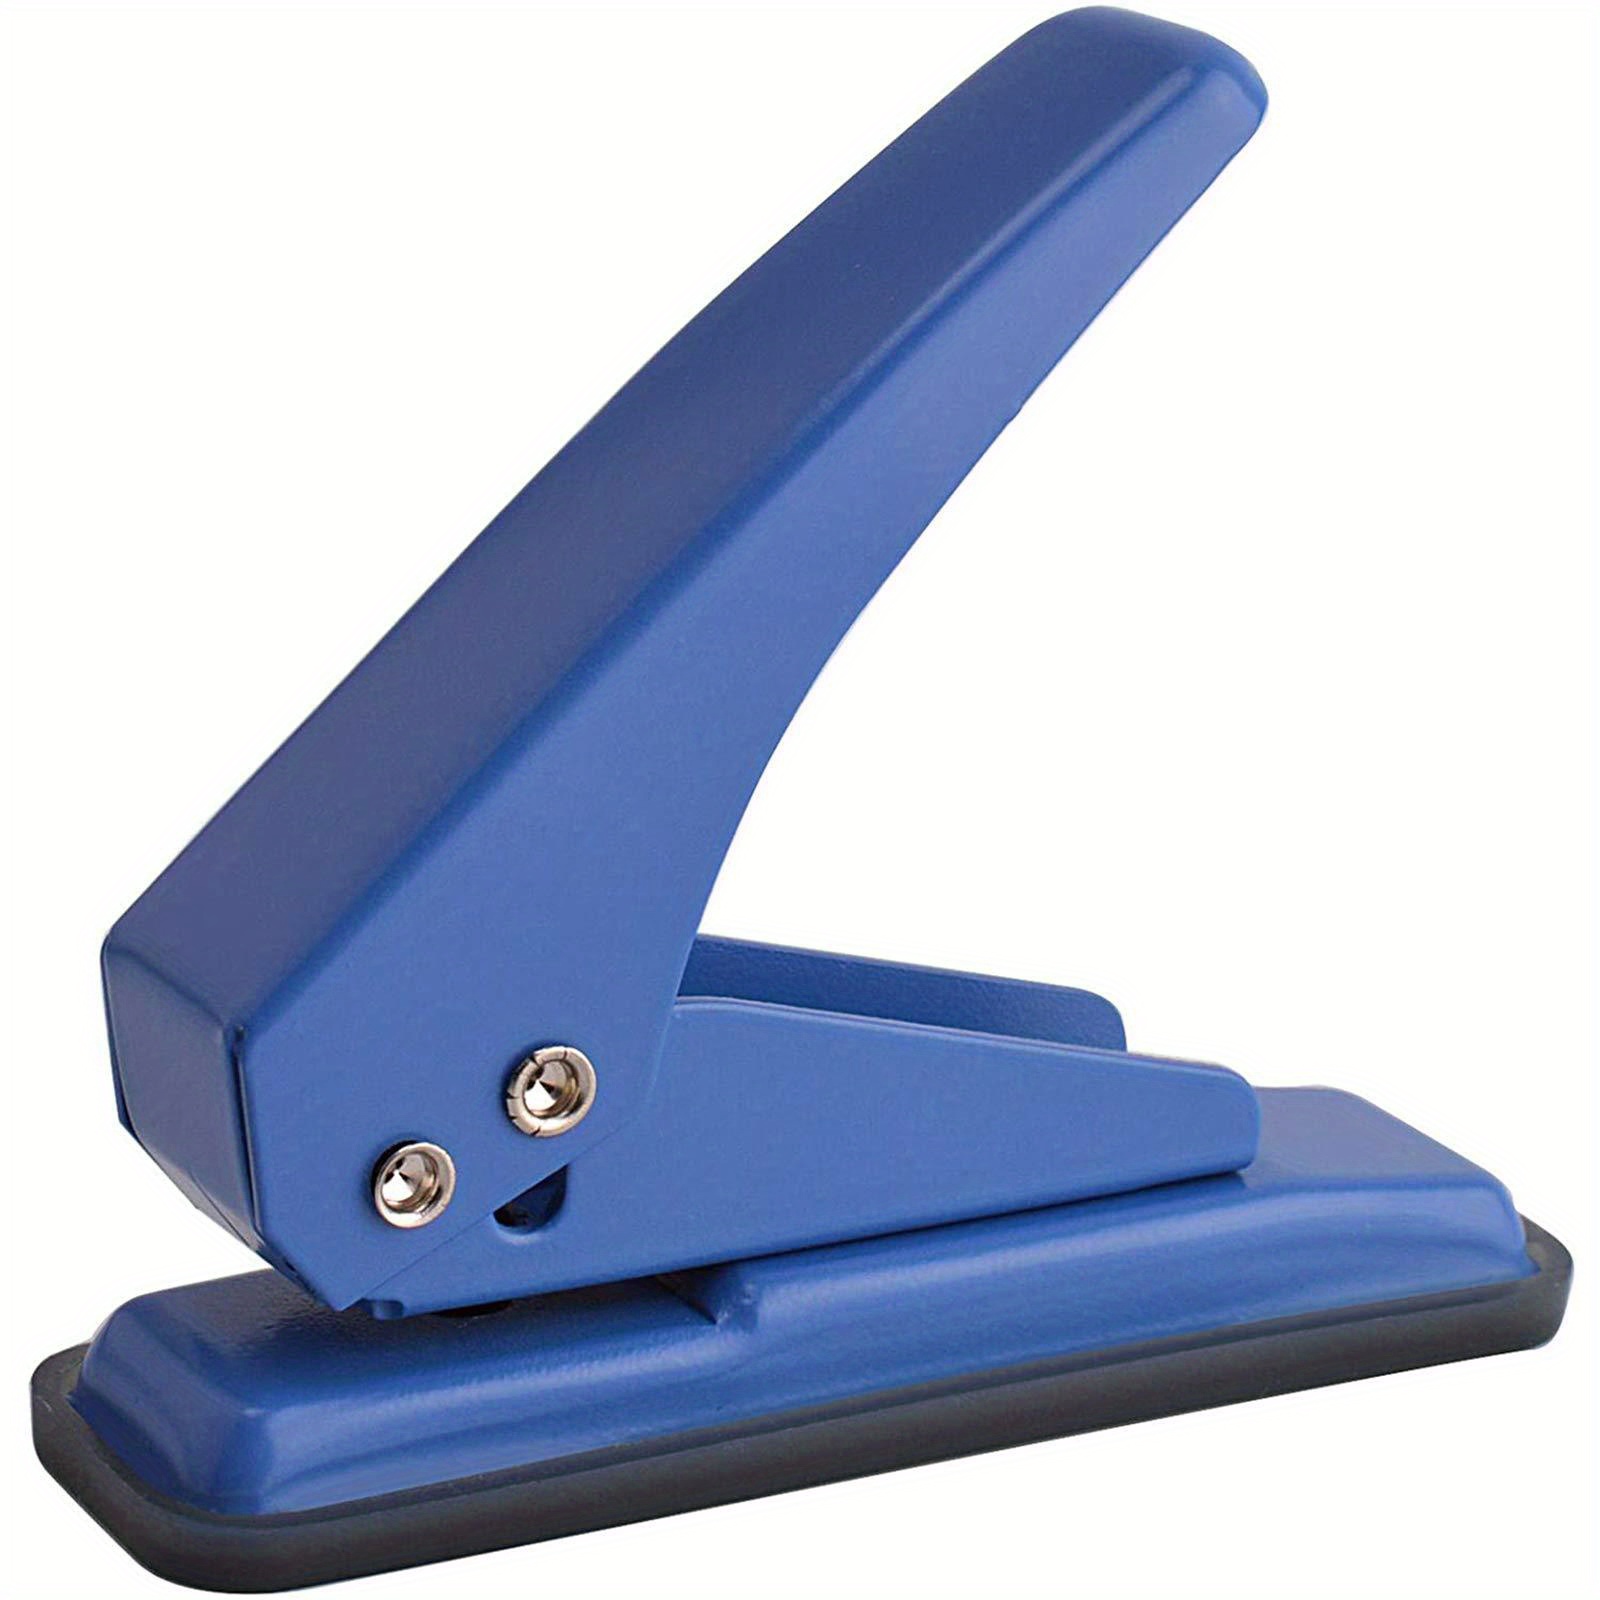  Single Hole Punch and Mini Hole Puncher : Arts, Crafts & Sewing